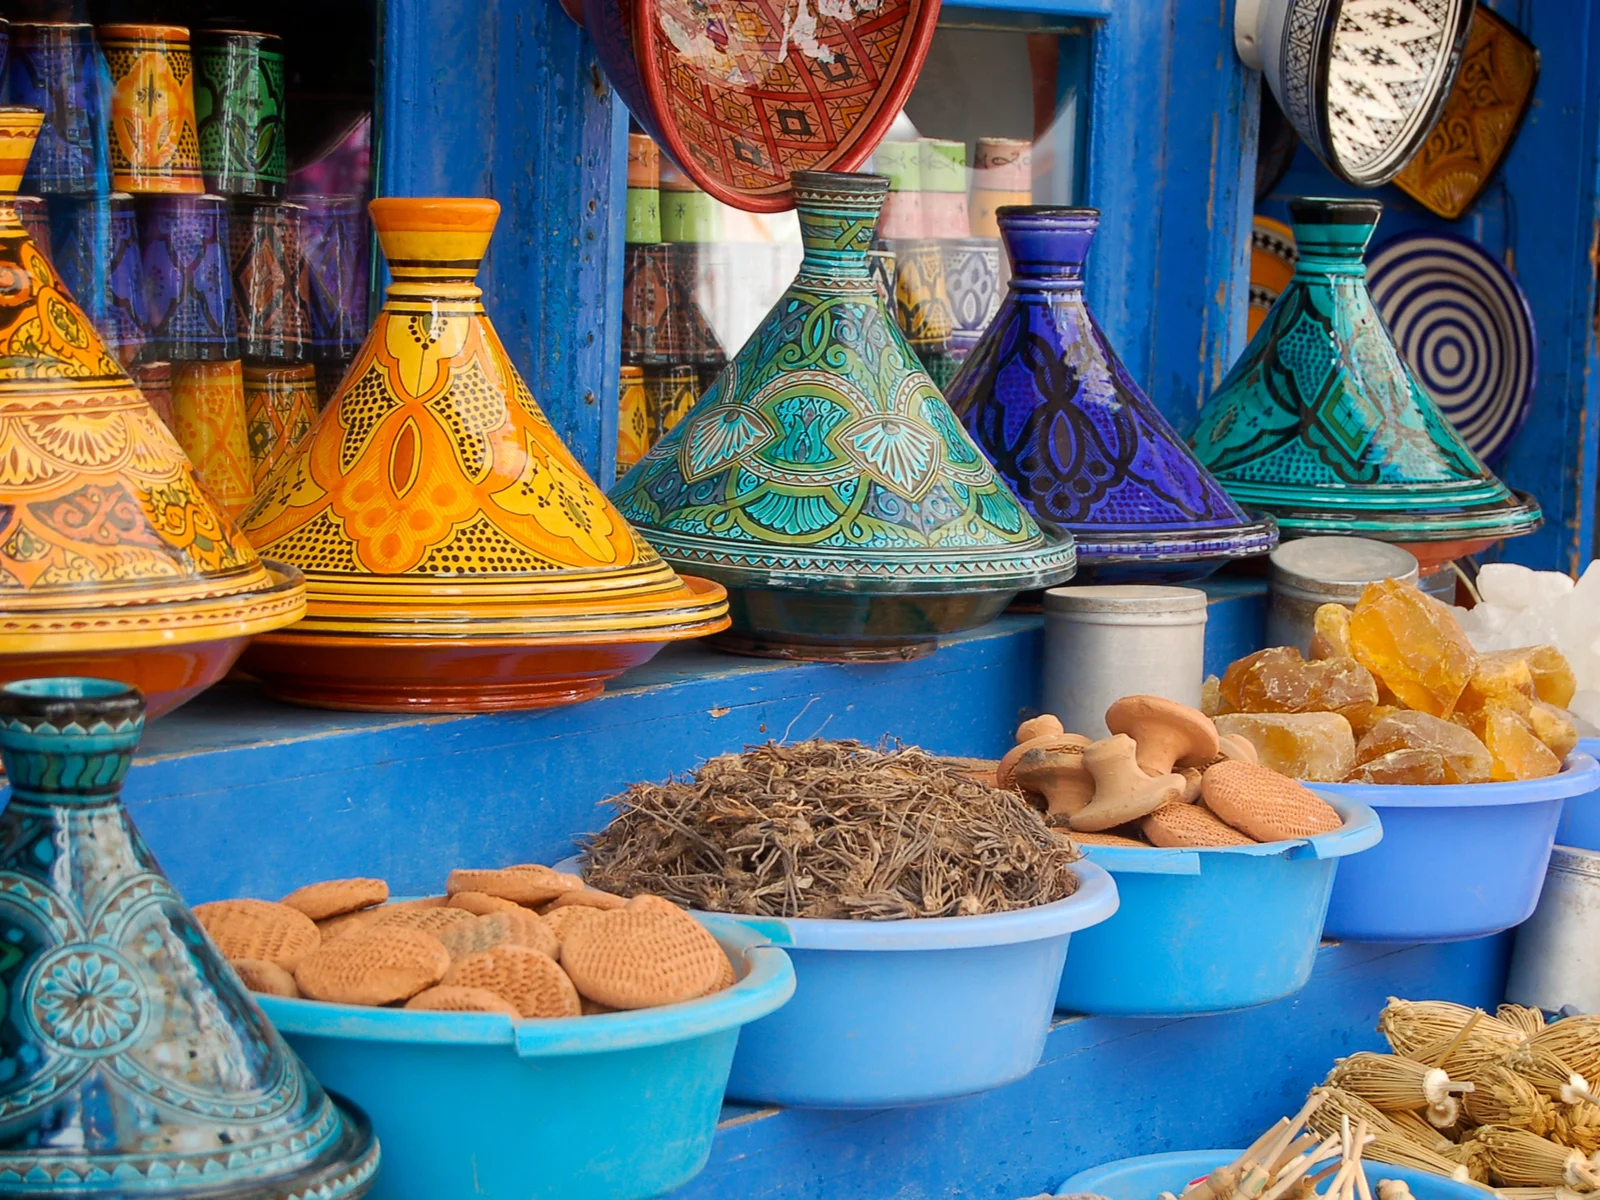 Tangine plates pictured in a Moroccan market